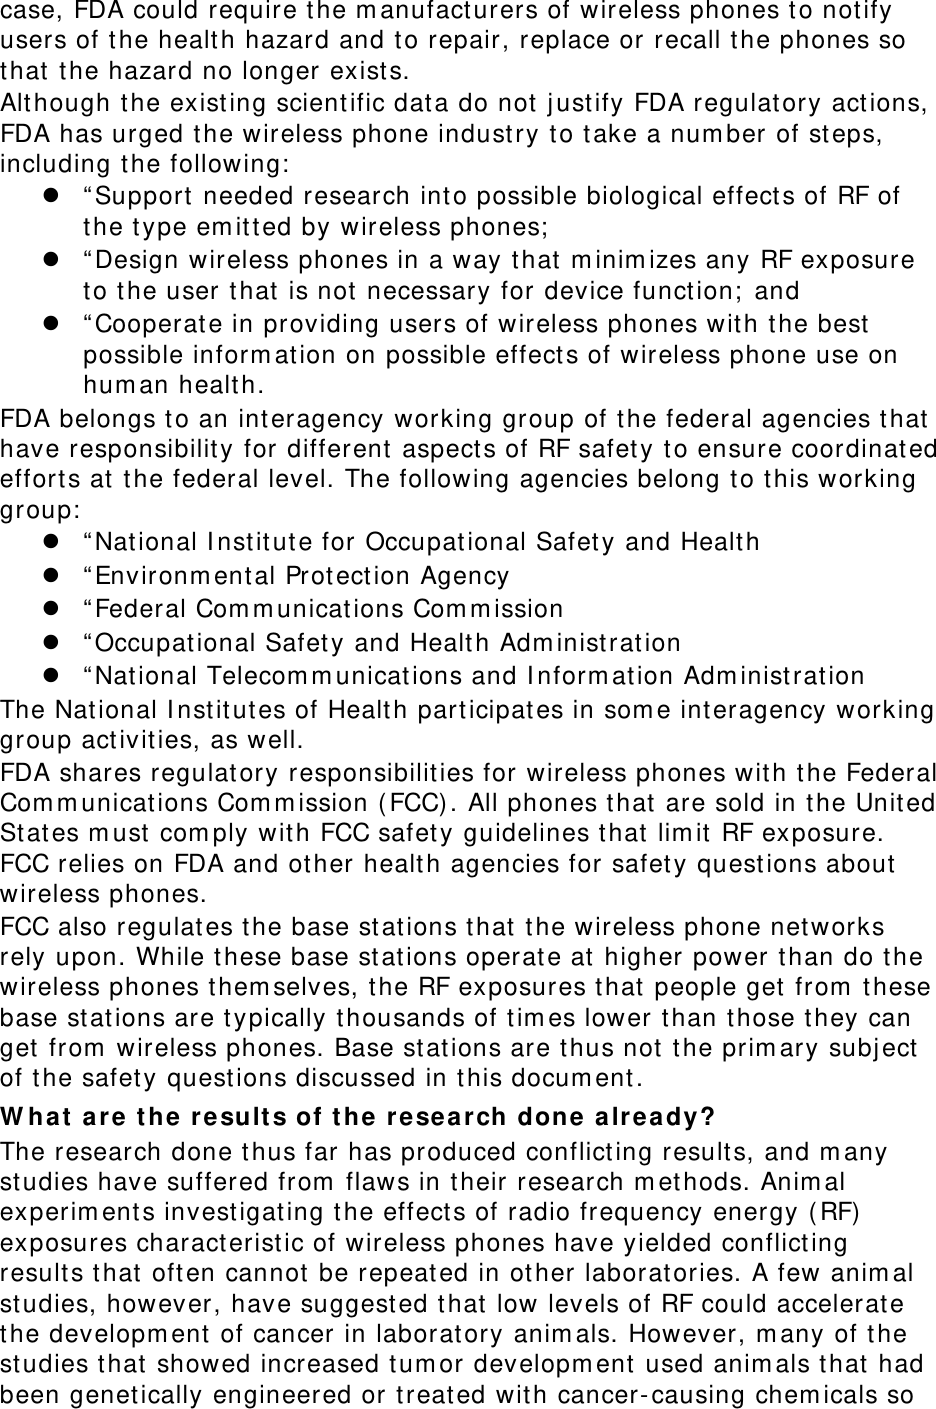 case, FDA could require the m anufact urers of w ireless phones to not ify users of t he health hazard and to repair, replace or recall t he phones so that the hazard no longer exist s. Alt hough t he exist ing scientific data do not j ust ify FDA regulatory act ions, FDA has urged t he wireless phone industry to take a num ber of st eps, including the following:  z “ Support  needed research int o possible biological effect s of RF of the type em it t ed by wireless phones;  z “ Design wireless phones in a way t hat m inim izes any RF exposure to the user t hat is not necessary for device funct ion;  and z “ Cooperat e in providing users of wireless phones wit h t he best  possible inform at ion on possible effect s of wireless phone use on hum an healt h. FDA belongs to an int eragency working group of the federal agencies t hat  have responsibilit y for different  aspect s of RF safet y to ensure coordinated efforts at  t he federal level. The following agencies belong to this working group:  z “ Nat ional I nstit ute for Occupational Safet y and Healt h z “ Environm ent al Prot ect ion Agency z “ Federal Com m unicat ions Com m ission z “ Occupational Safet y and Health Adm inist ration z “ Nat ional Telecom m unications and I nform at ion Adm inist ration The National I nstit ut es of Health part icipat es in som e interagency working group act ivities, as well. FDA shares regulat ory responsibilities for wireless phones with t he Federal Com m unications Com m ission (FCC). All phones t hat are sold in t he United St ates m ust com ply wit h FCC safety guidelines that  lim it RF exposure. FCC relies on FDA and other health agencies for safet y quest ions about  wireless phones. FCC also regulat es the base st ations t hat the wireless phone networks rely upon. While t hese base st at ions operat e at higher power than do t he wireless phones t hem selves, the RF exposures t hat people get from  these base stat ions are t ypically t housands of tim es lower than t hose they can get  from  wireless phones. Base stat ions are t hus not  t he prim ary subj ect  of t he safet y quest ions discussed in this docum ent . W hat are t he resu lt s of the research done  already? The research done thus far has produced conflict ing result s, and m any studies have suffered from  flaws in t heir research m et hods. Anim al experim ent s invest igat ing the effect s of radio frequency energy ( RF) exposures charact eristic of wireless phones have yielded conflict ing results that  oft en cannot be repeat ed in ot her laboratories. A few anim al studies, however, have suggest ed t hat low levels of RF could accelerate the developm ent of cancer in laborat ory anim als. However, m any of t he studies t hat showed increased tum or developm ent used anim als t hat  had been genet ically engineered or t reated with cancer- causing chem icals so 